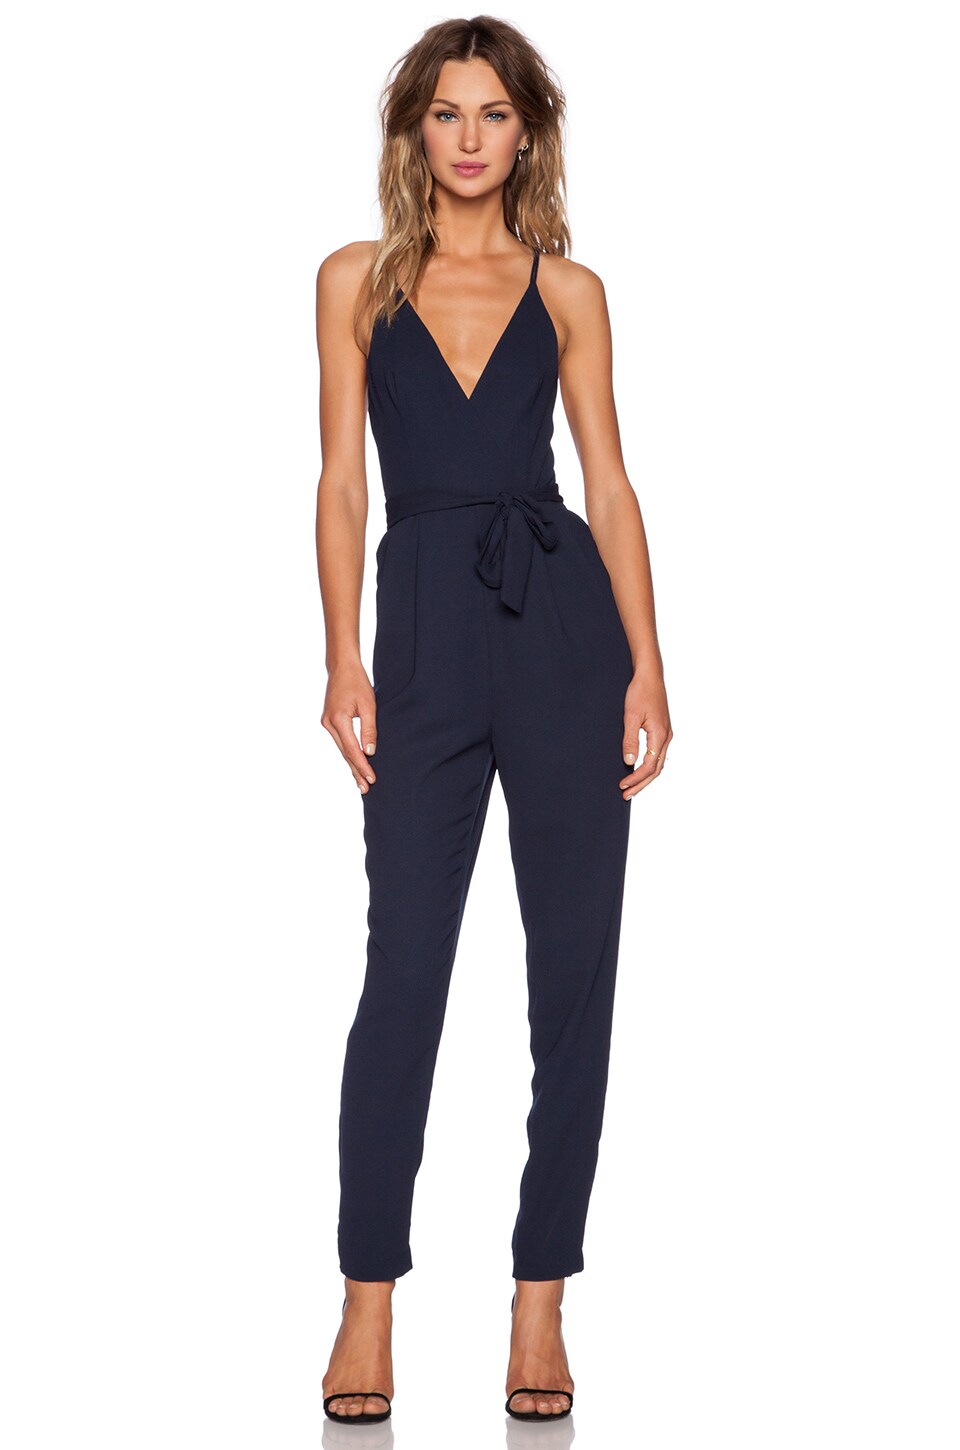 Finders Keepers Here We Go Jumpsuit in Navy | REVOLVE